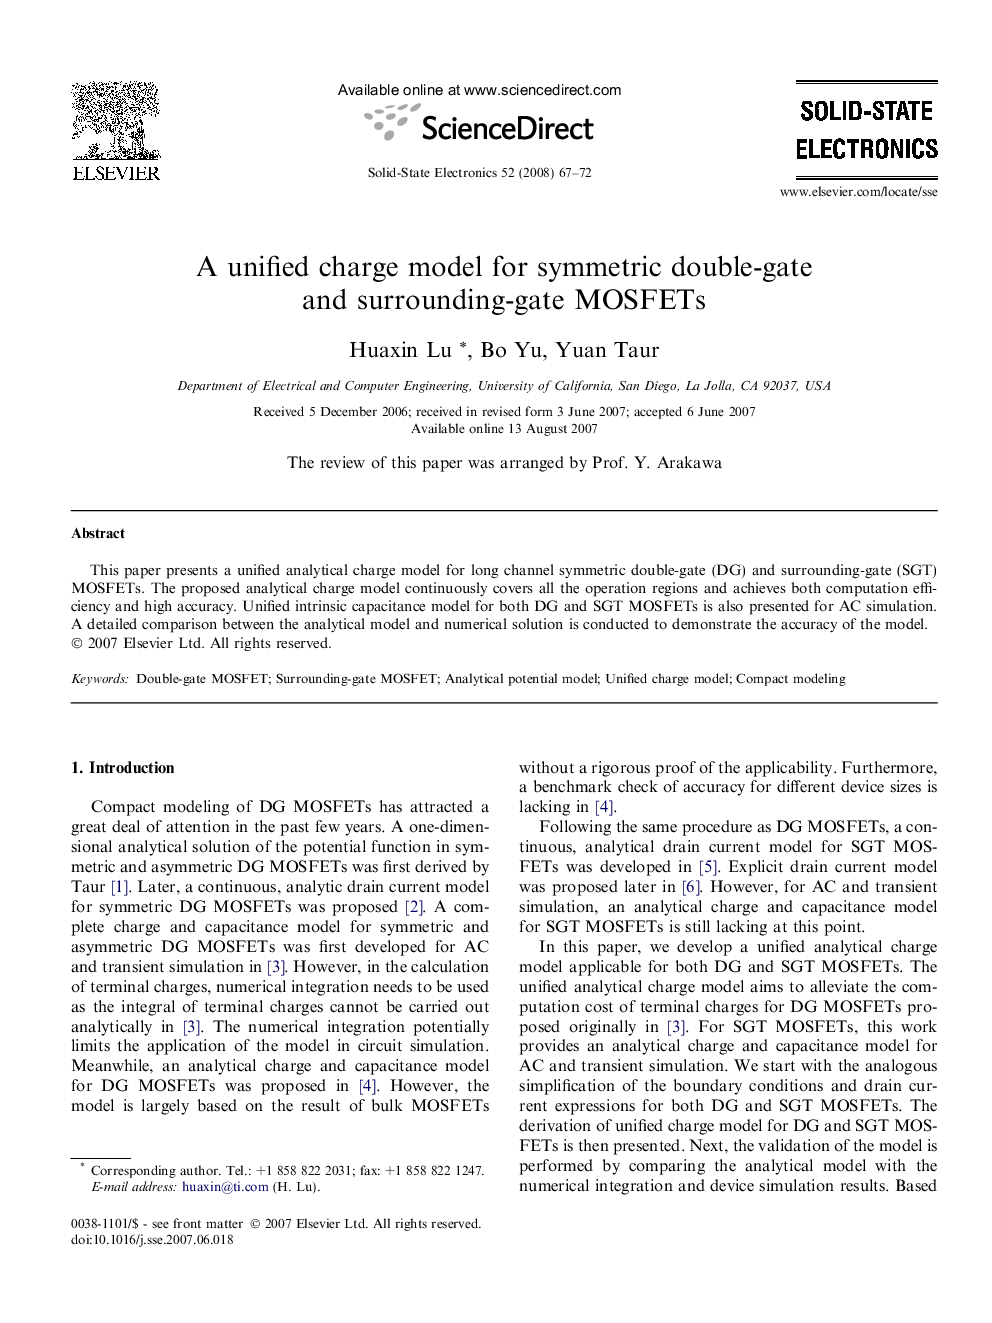 A unified charge model for symmetric double-gate and surrounding-gate MOSFETs